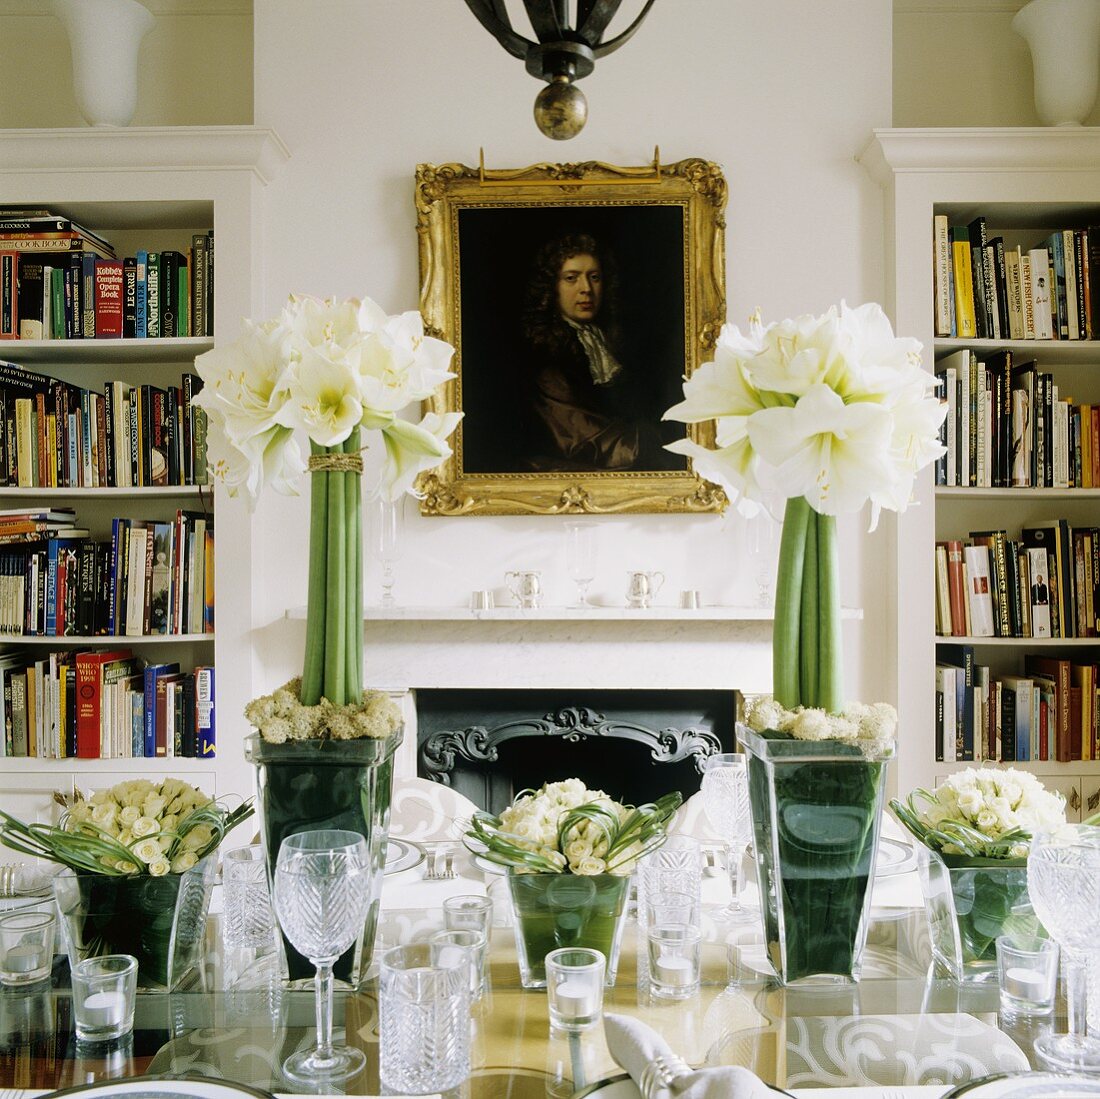 A festively decoration table with white amaryllis in a glass vase and a picture over a fireplace